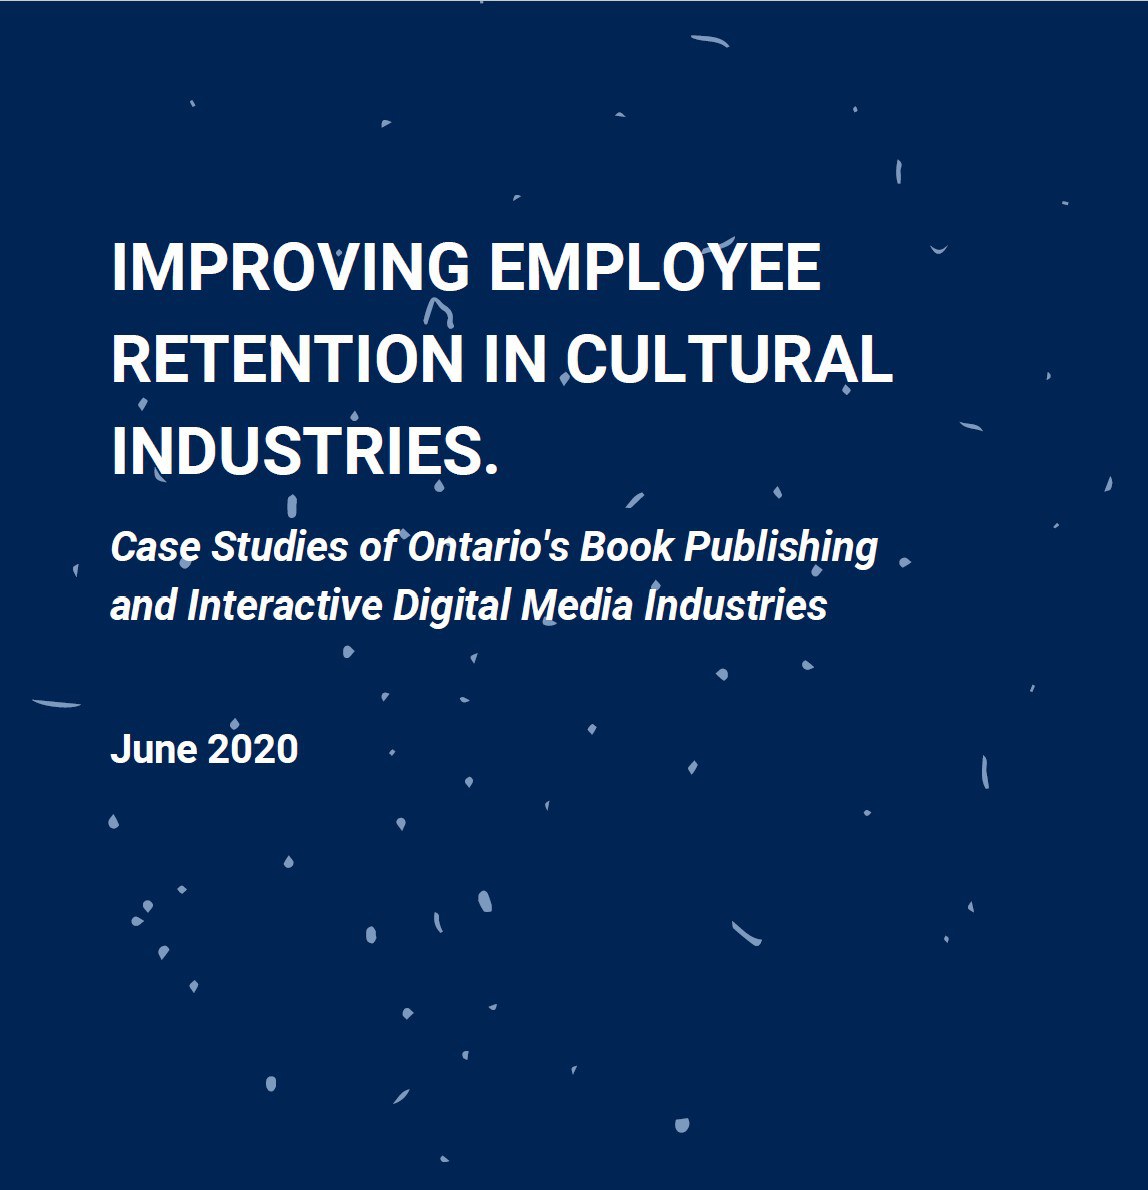 Improving Employee Retention in Cultural Industries